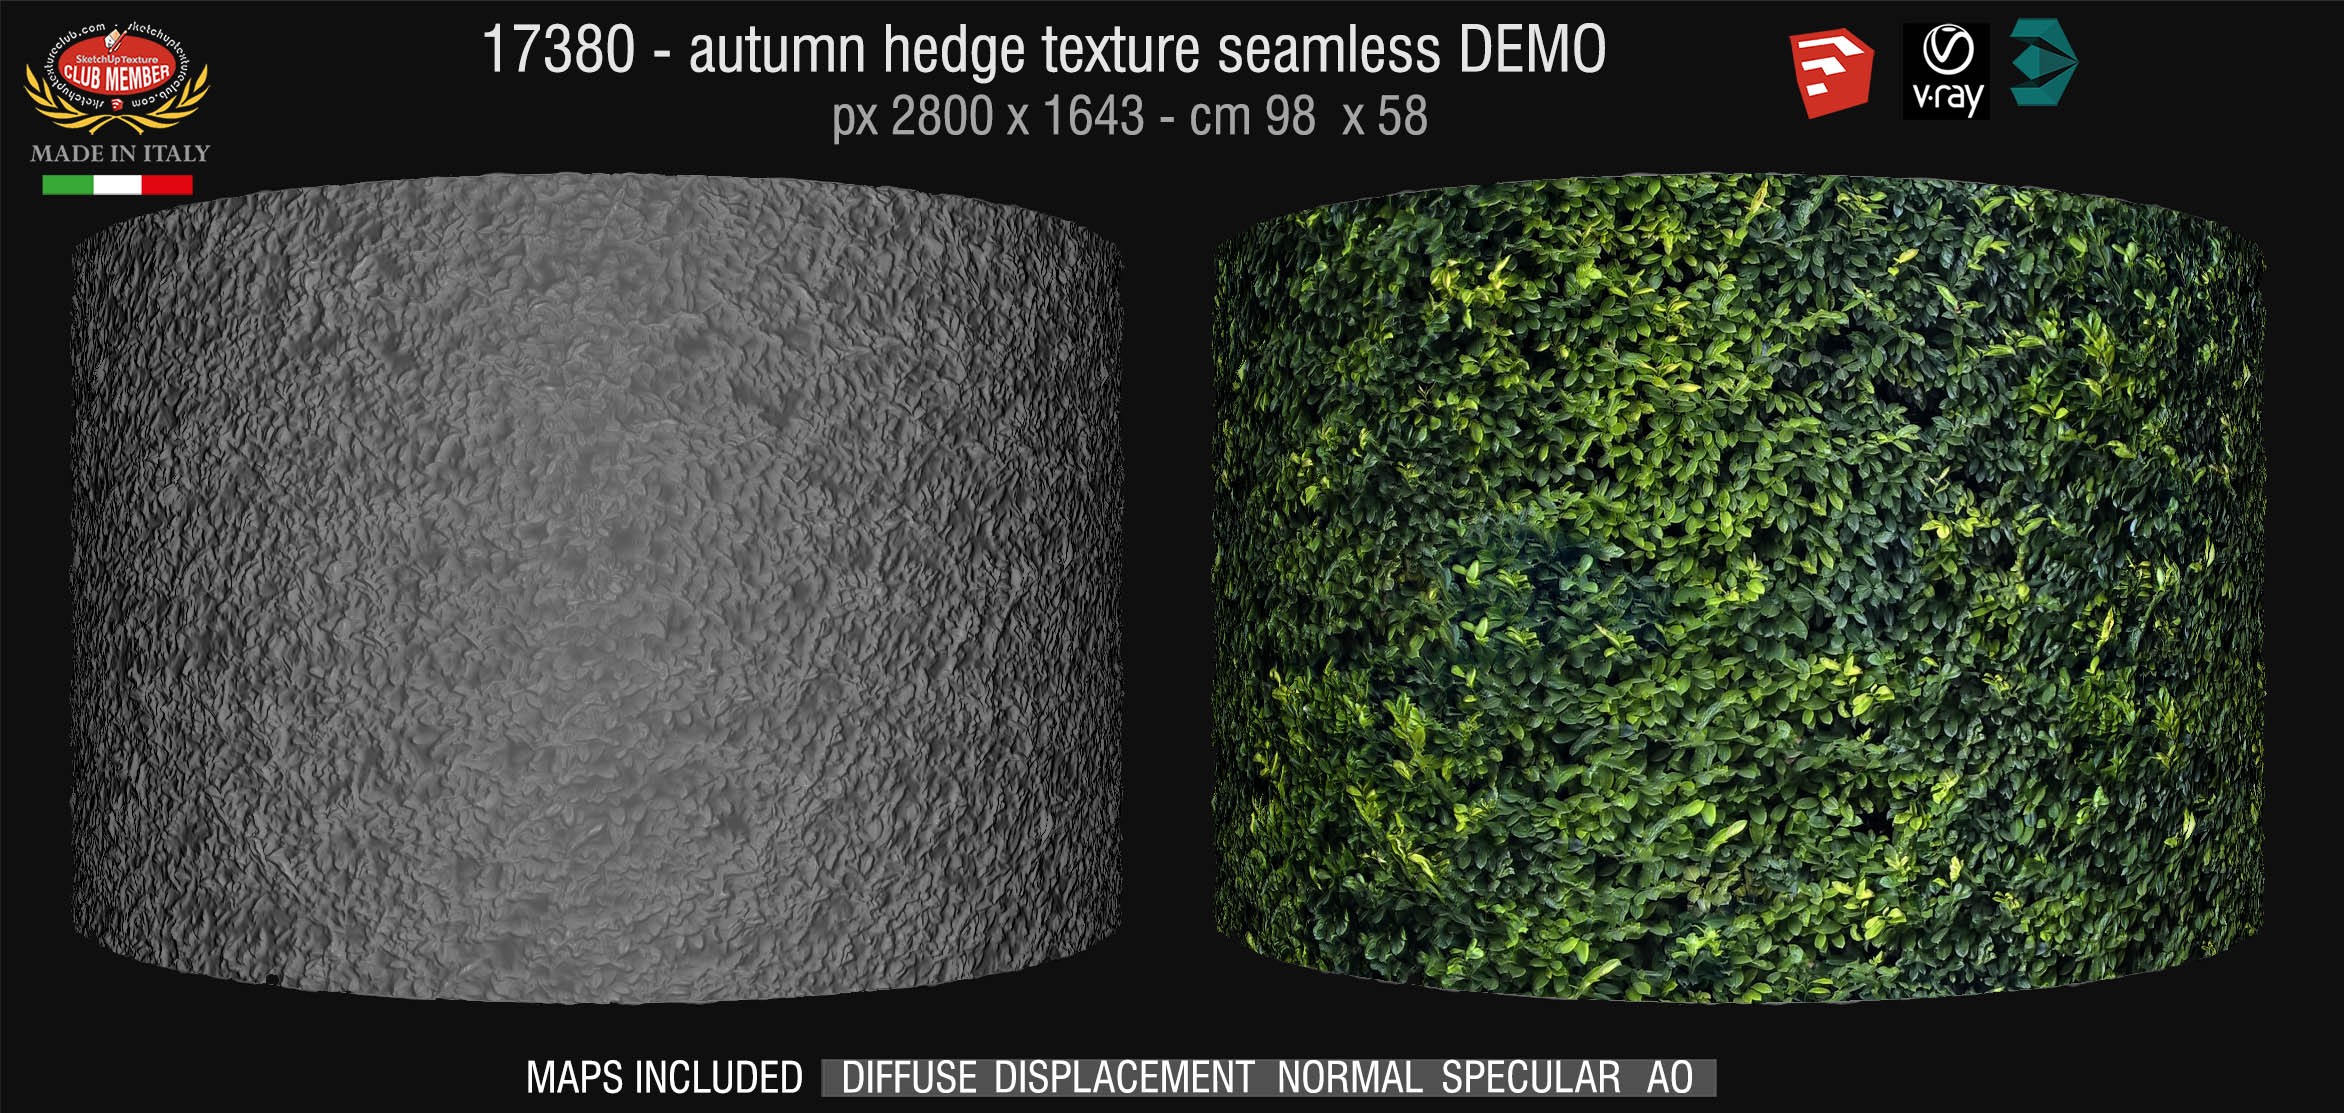 17380 HR green hedge texture + maps DEMO